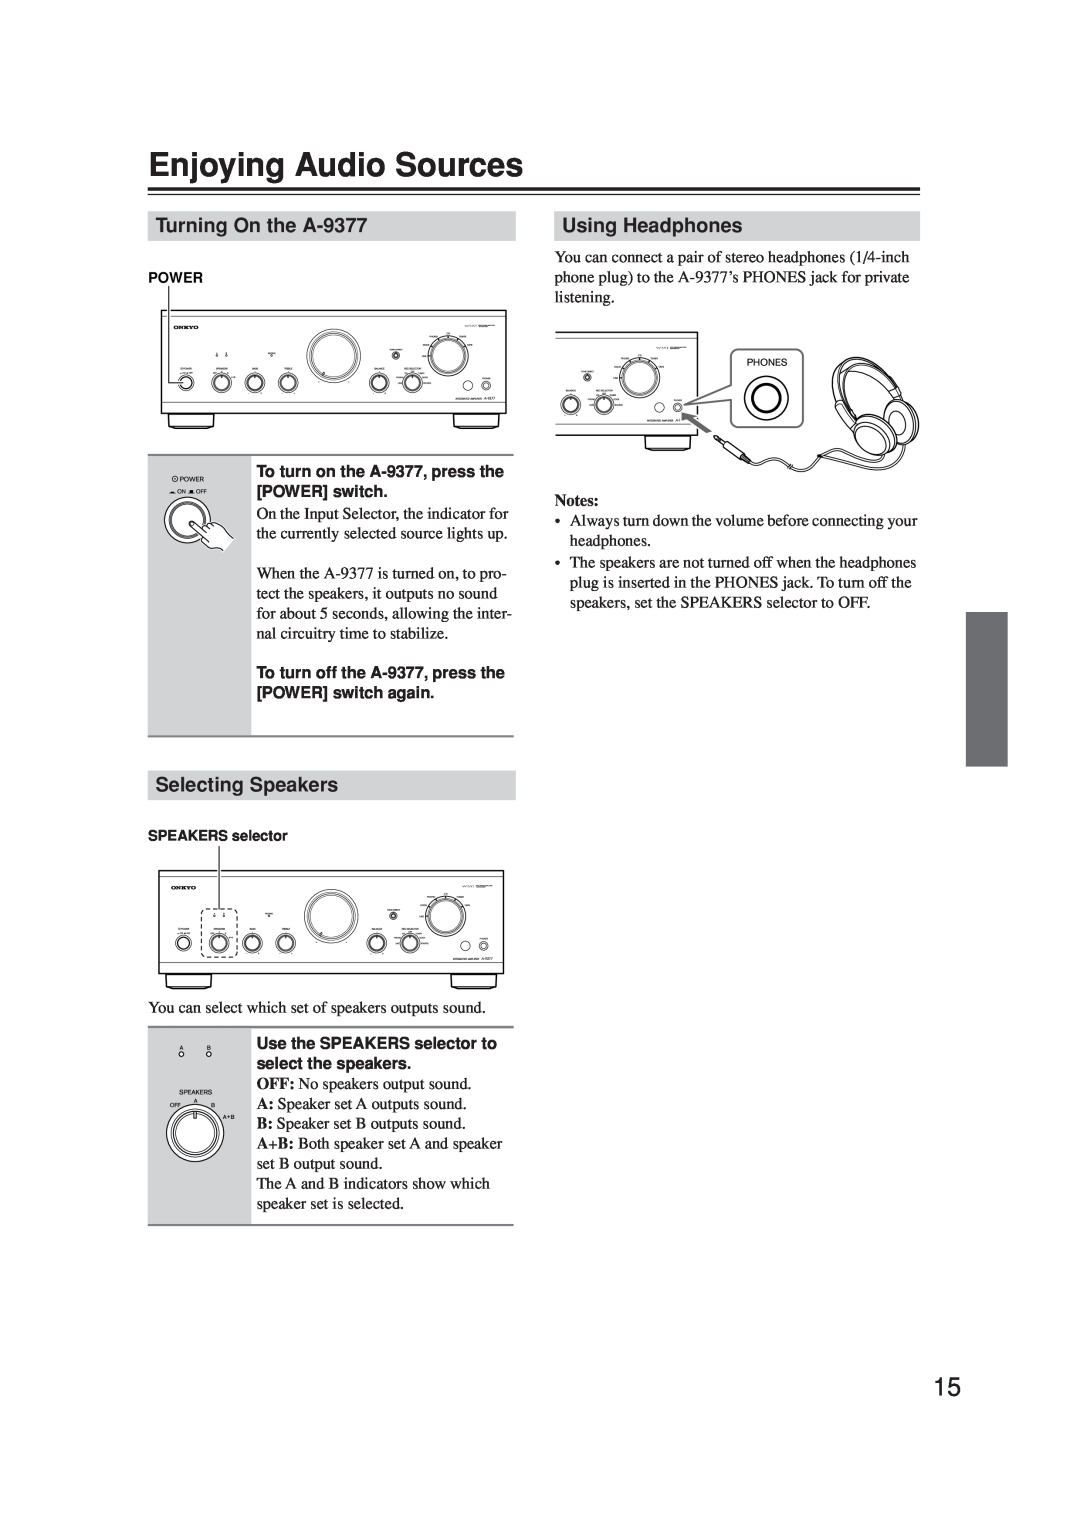 Onkyo instruction manual Enjoying Audio Sources, Turning On the A-9377, Using Headphones, Selecting Speakers 